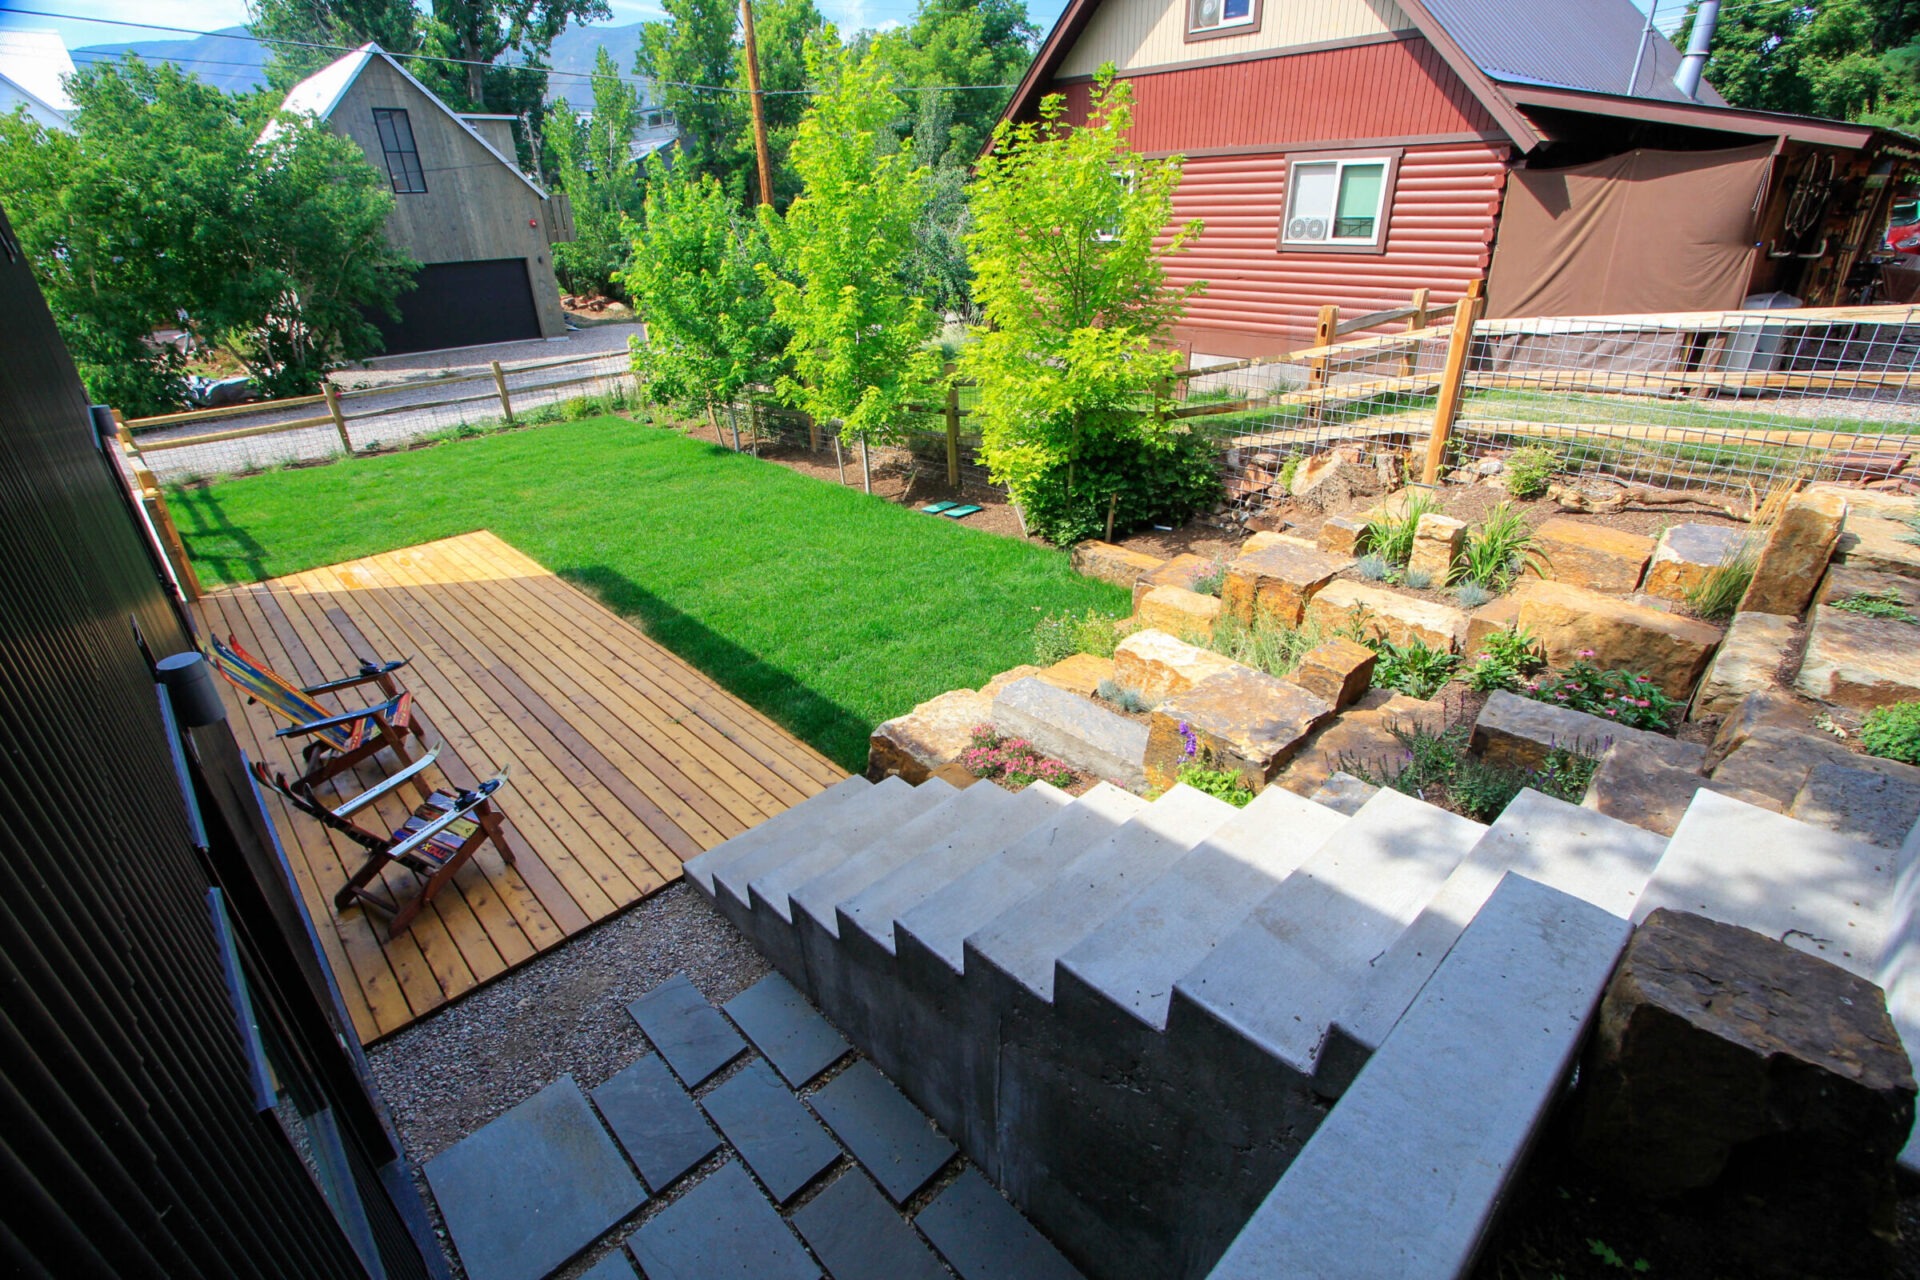 An elevated view of a terraced backyard with a wooden deck, concrete stairs, a lush lawn, landscaping with stone walls, and nearby buildings.